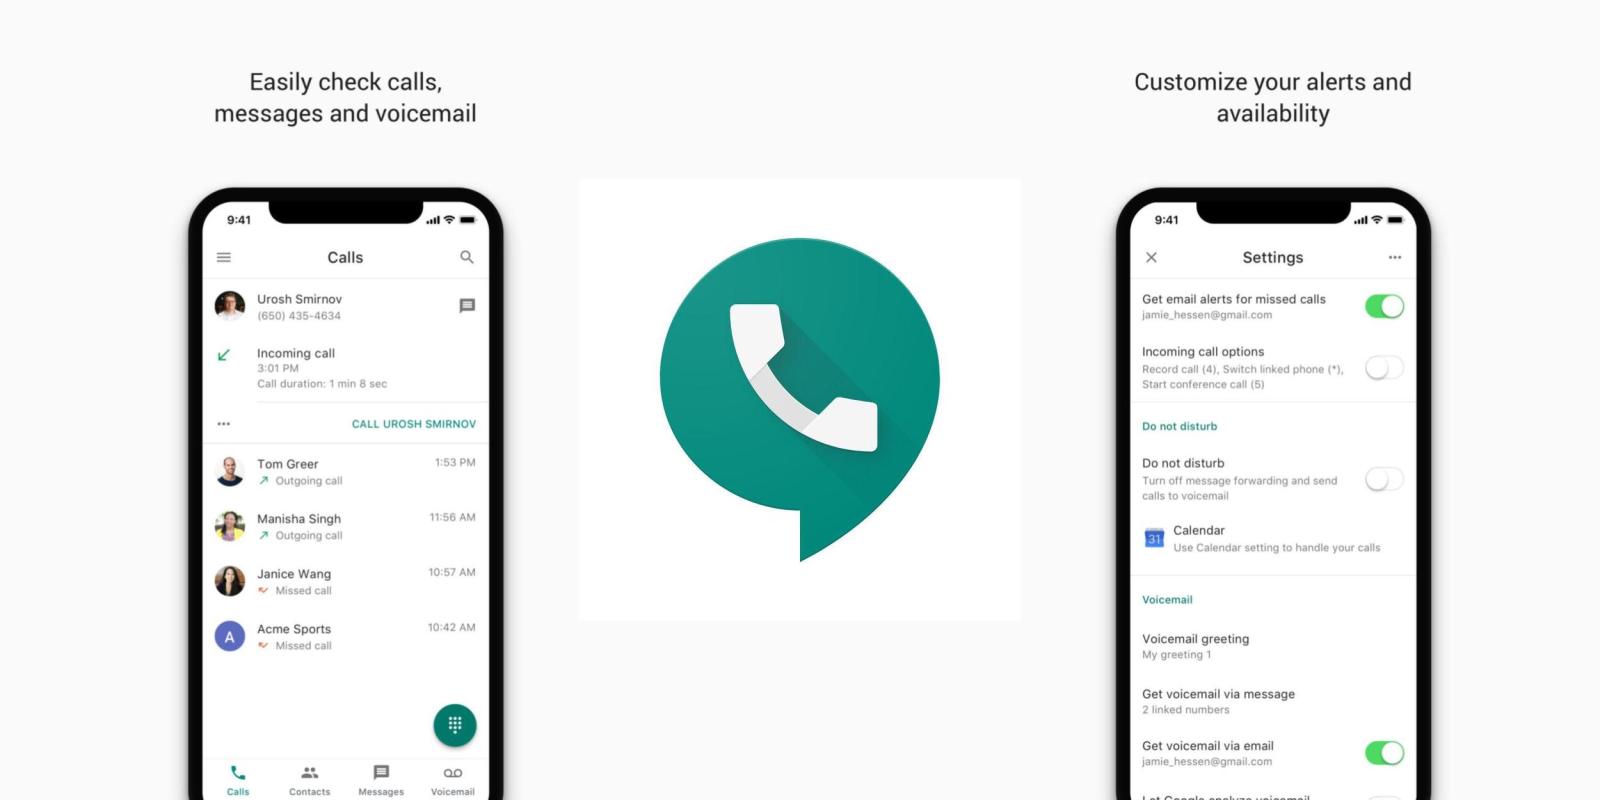 The Google Voice update for web allows calls to be made much easier from the computer